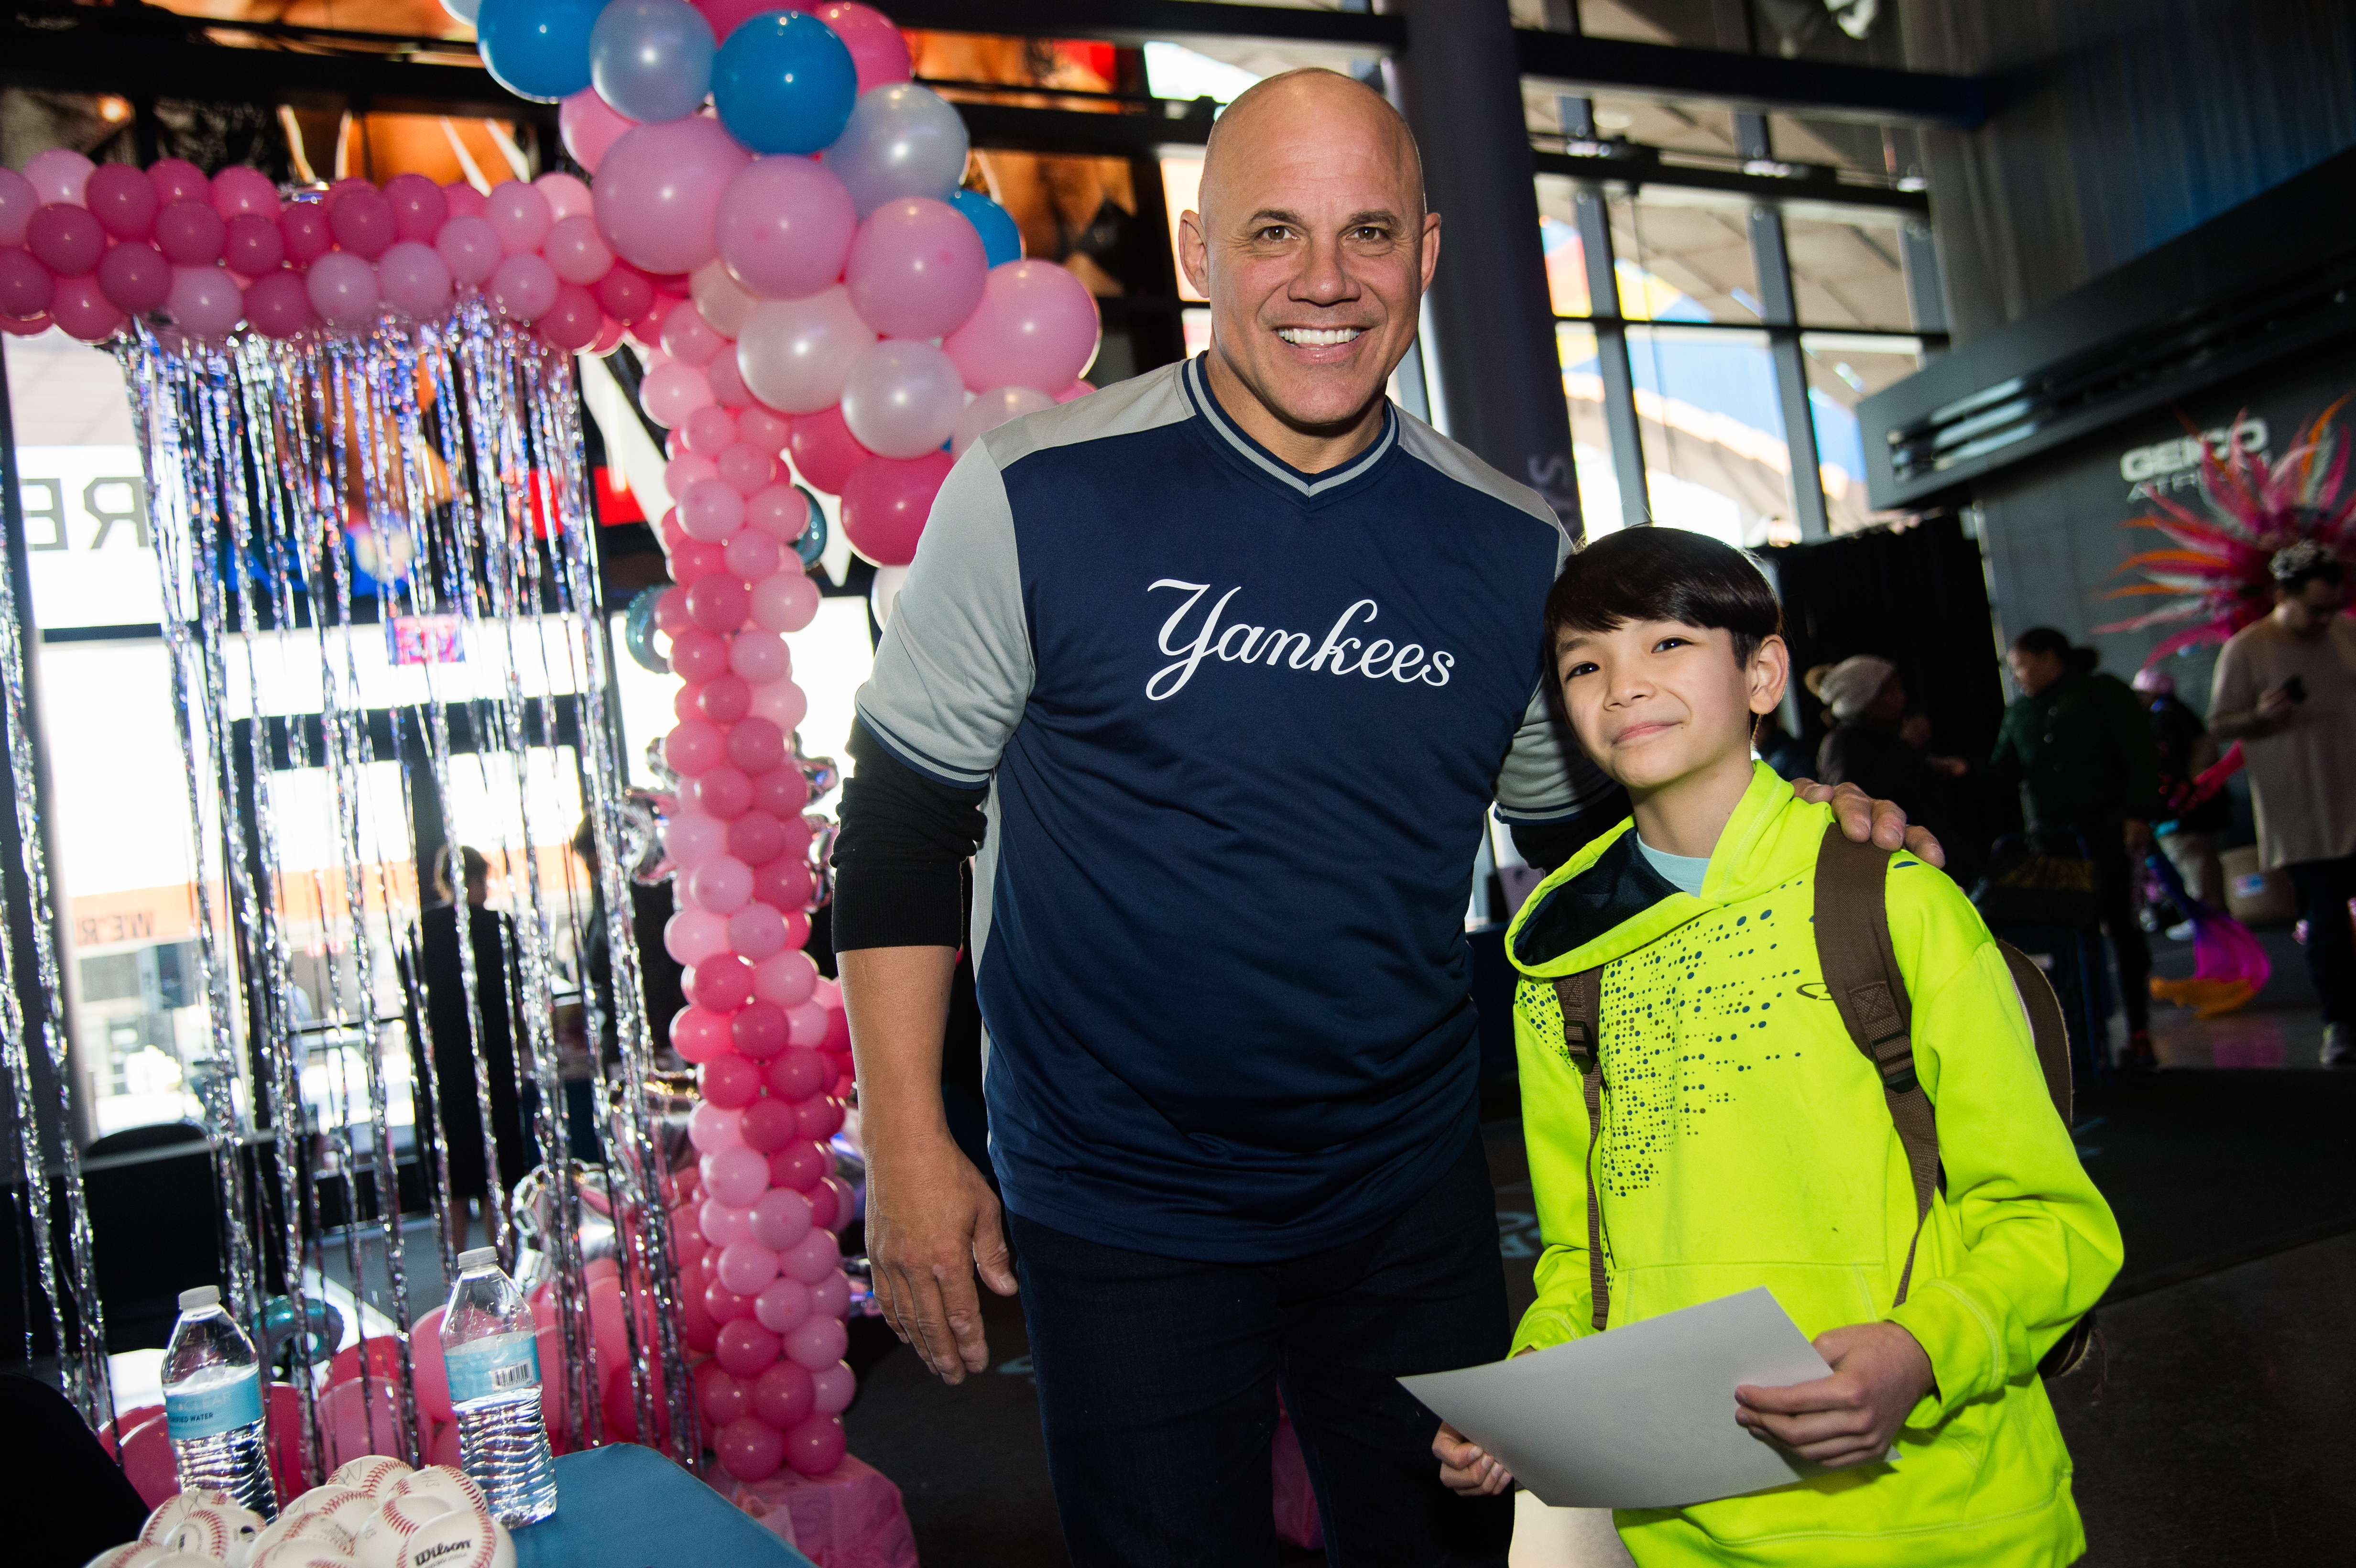 April 3, 2019 - United Breast Cancer Foundation Pink Bag Event at the Barclay's Center in Brooklyn, New York.